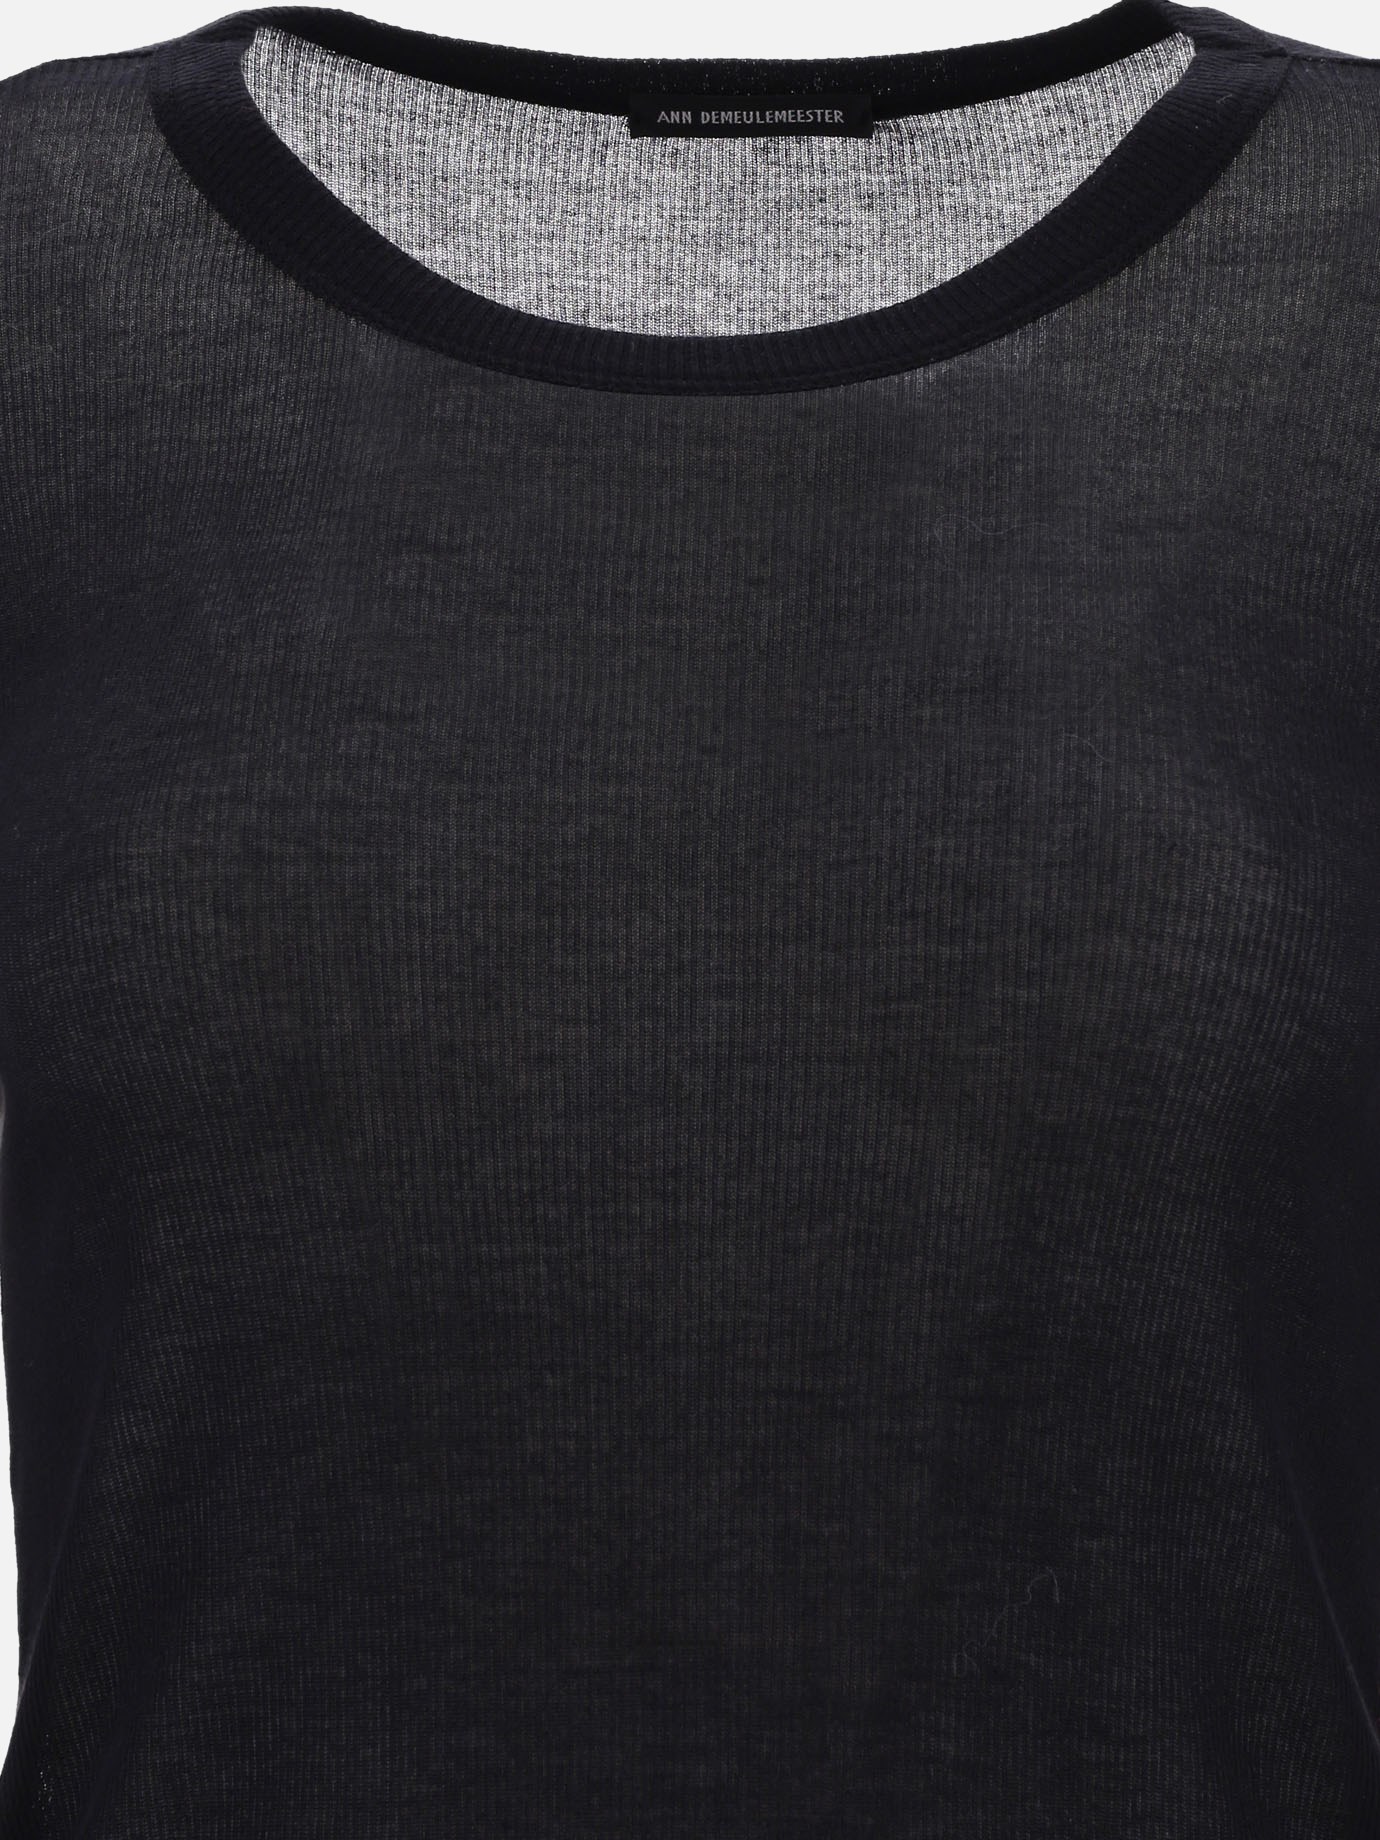  Karo  ribbed t-shirt by Ann Demeulemeester